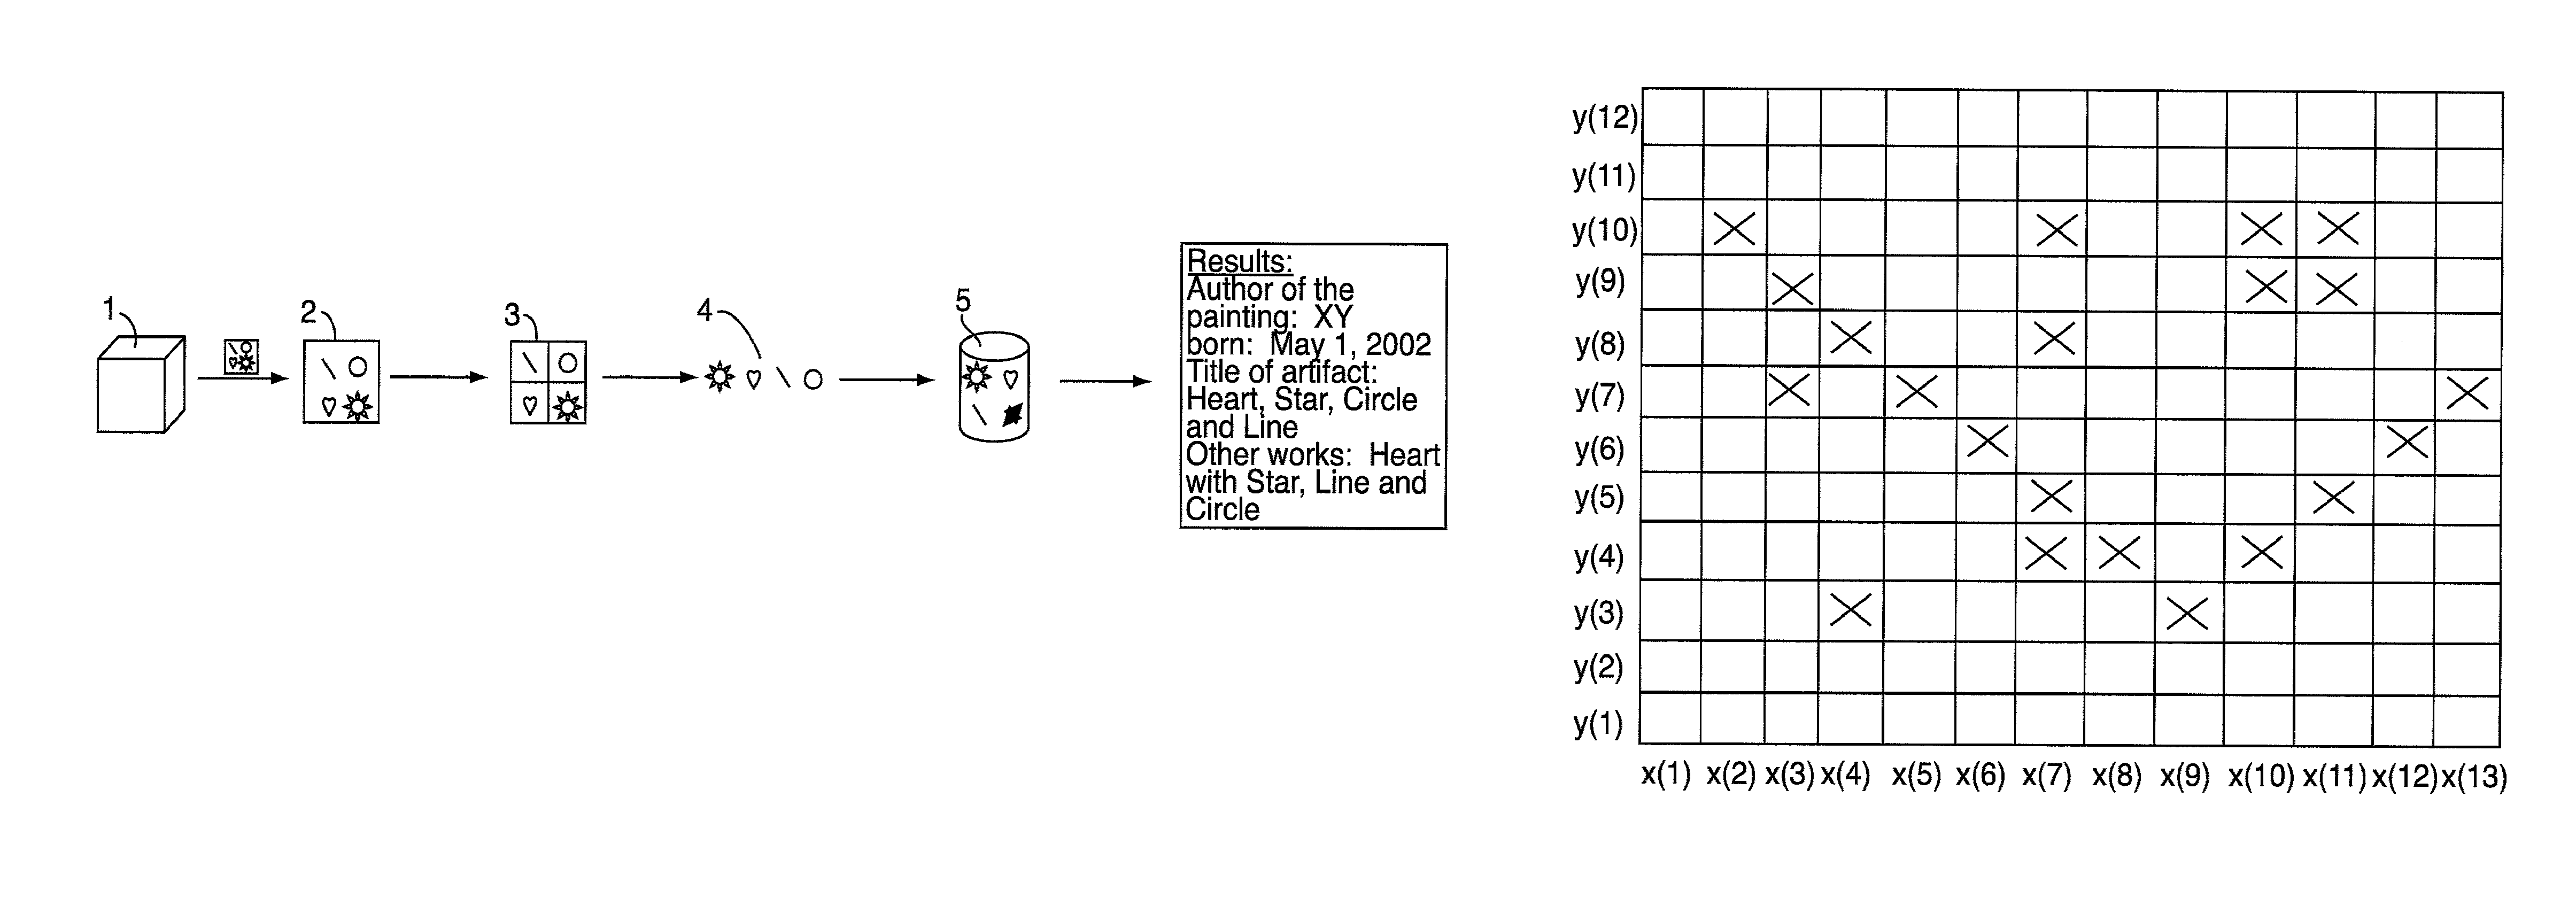 Apparatus and method for identifying the creator of a work of art